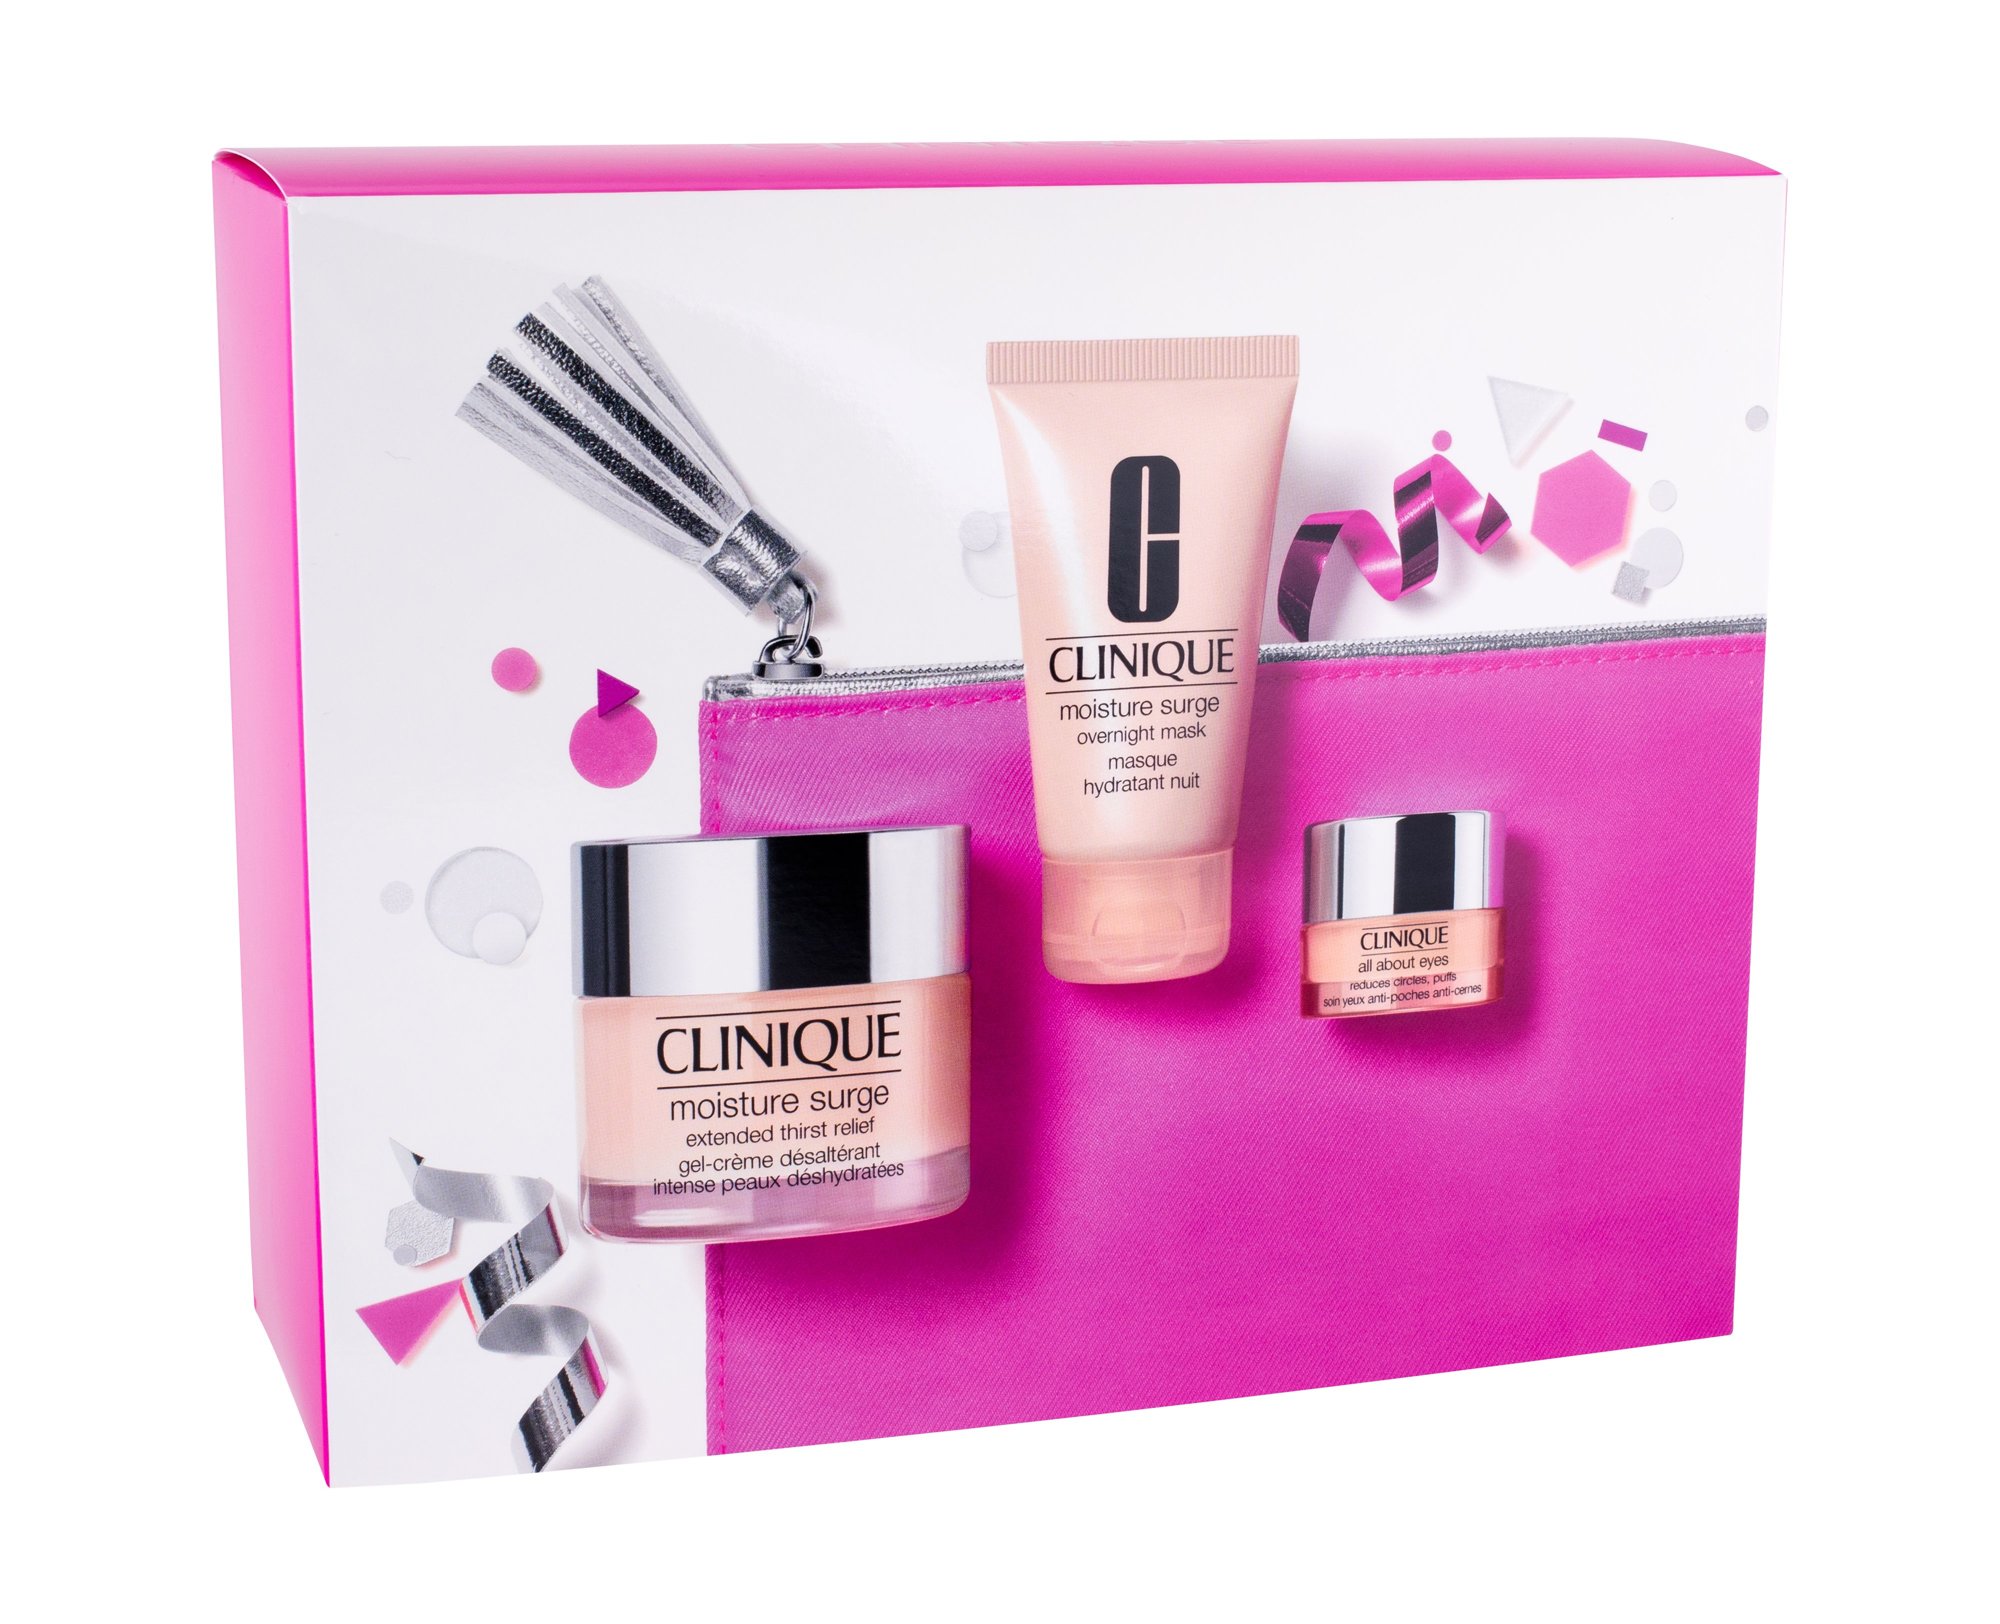 Clinique Moisture Surge 50ml Daily Facial Care 50 ml + Facial Mask 30 ml +All About Eyes 5 ml + Cosmetic Bag dieninis kremas Rinkinys